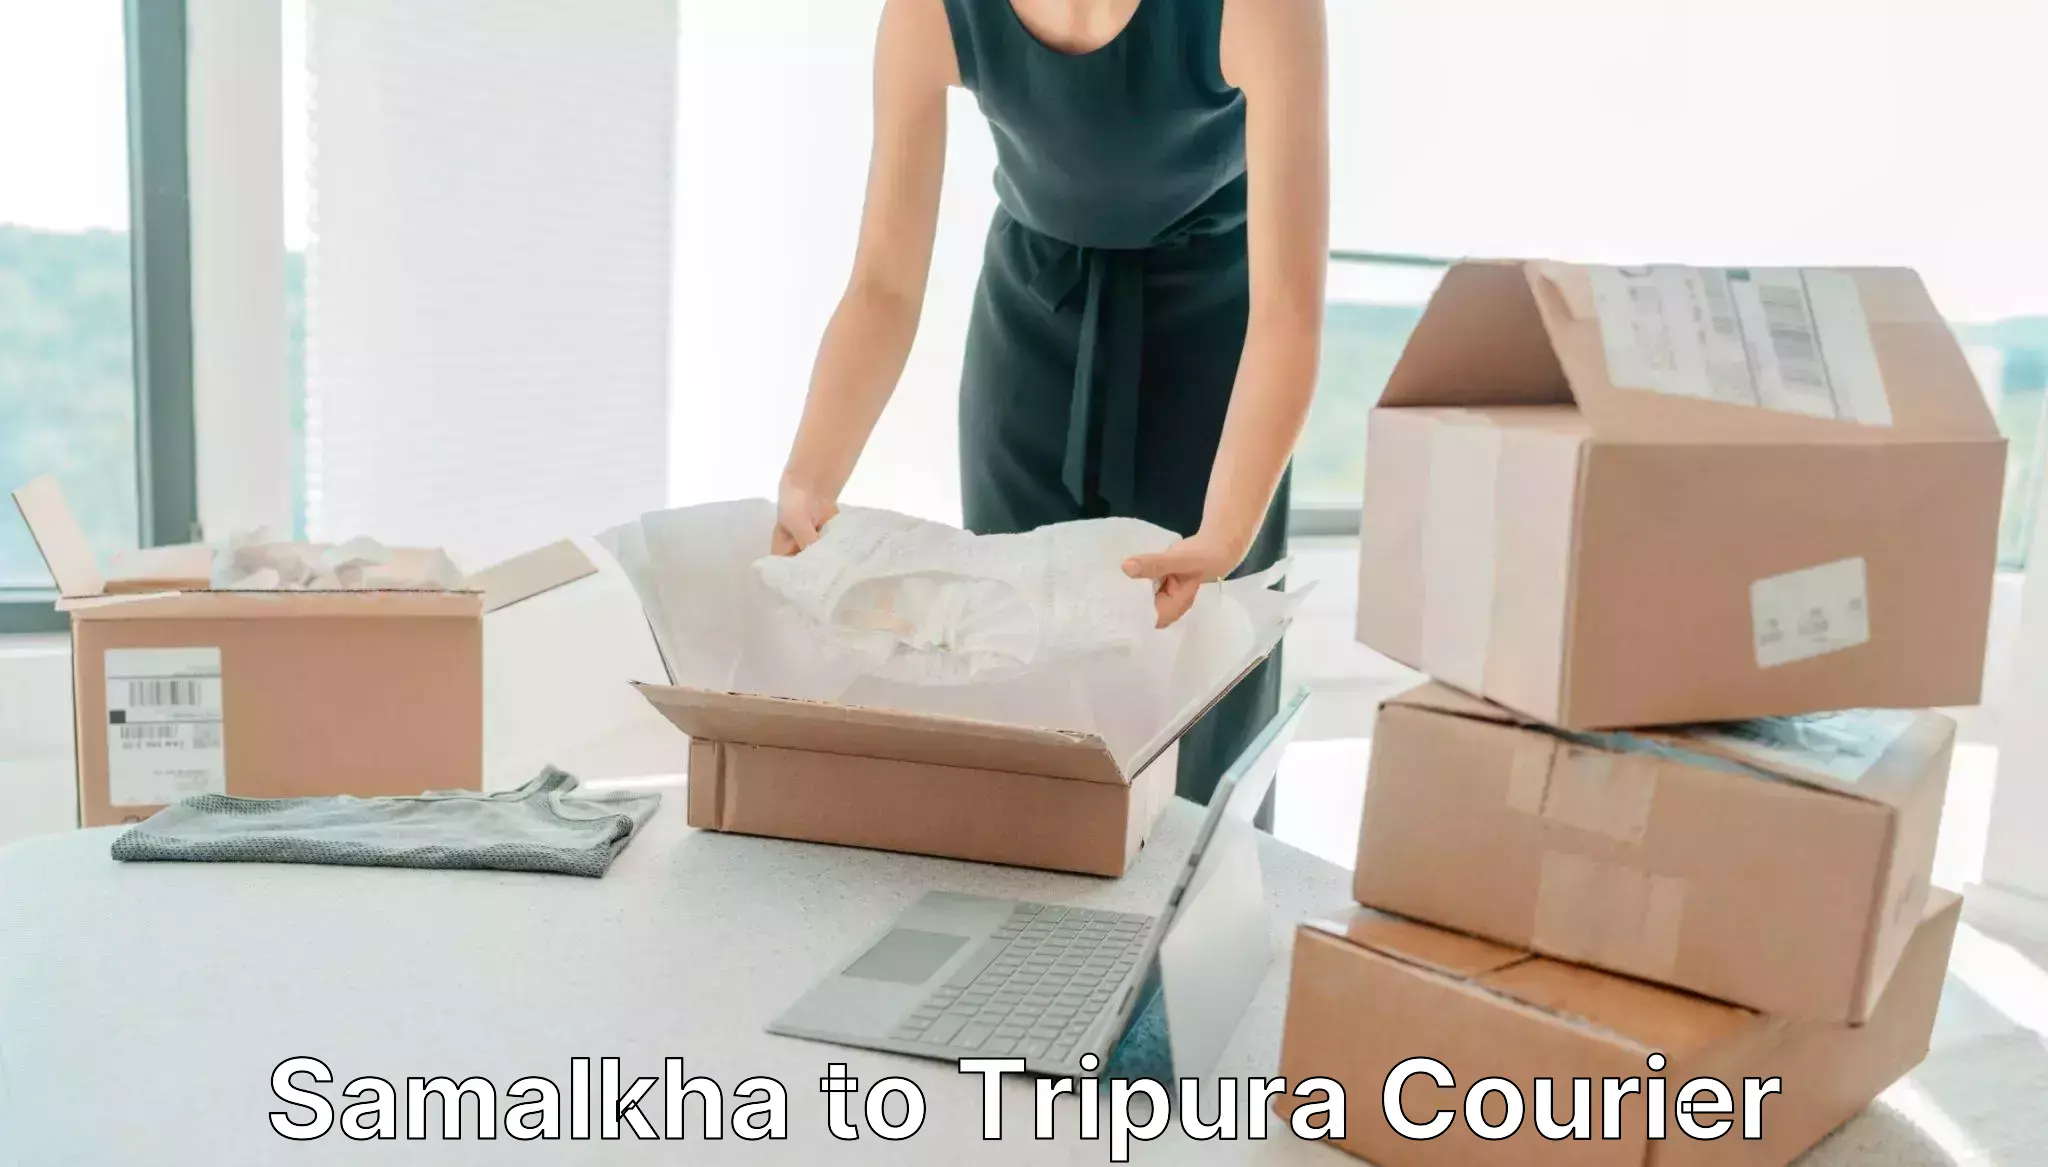 Next-day delivery options in Samalkha to Udaipur Tripura